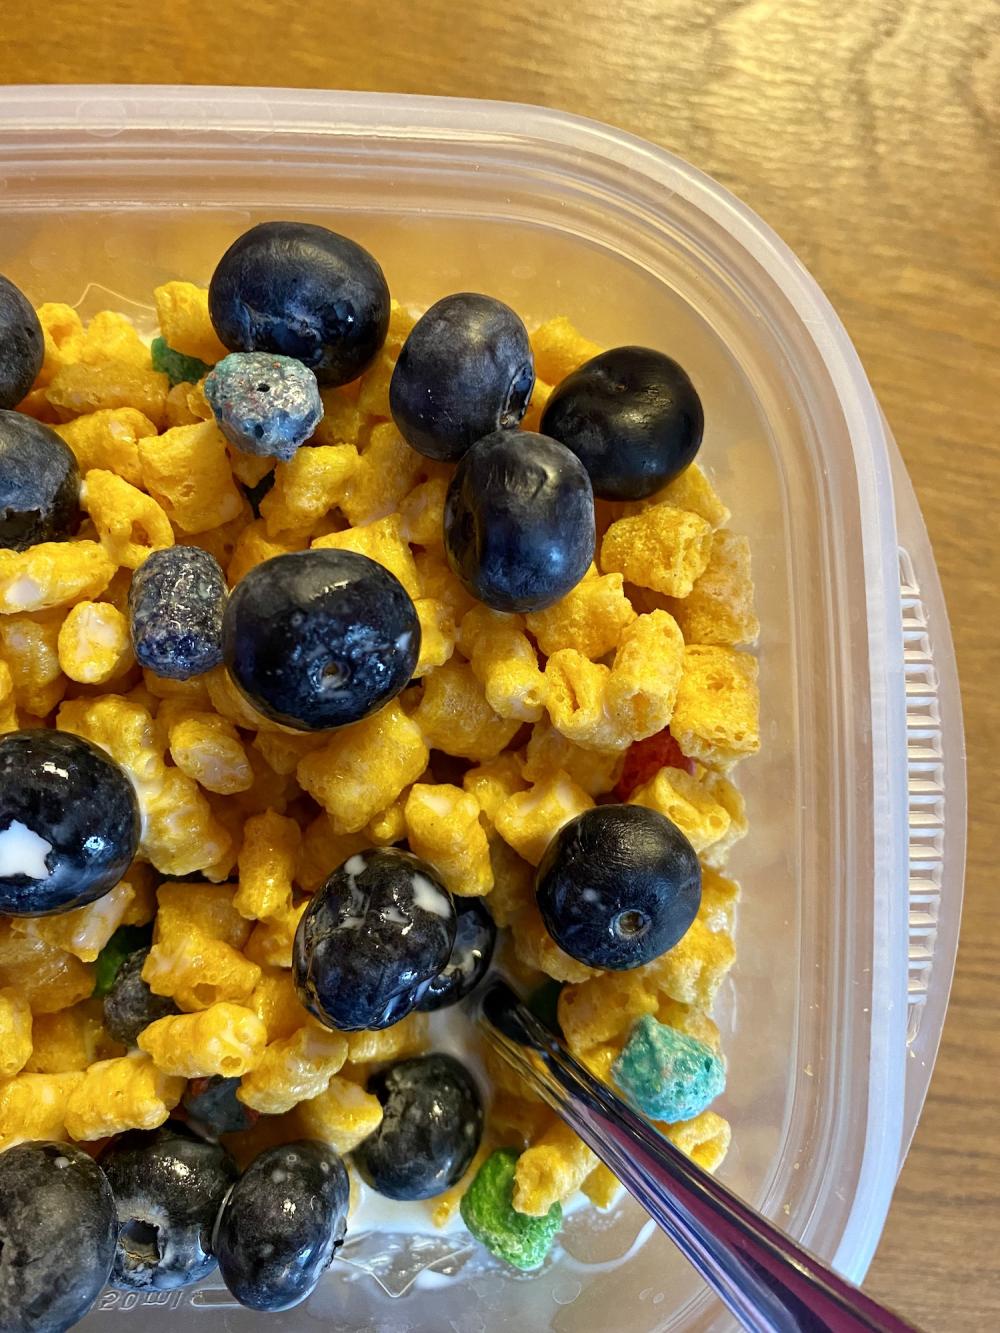 Capn Crunch with blueberries